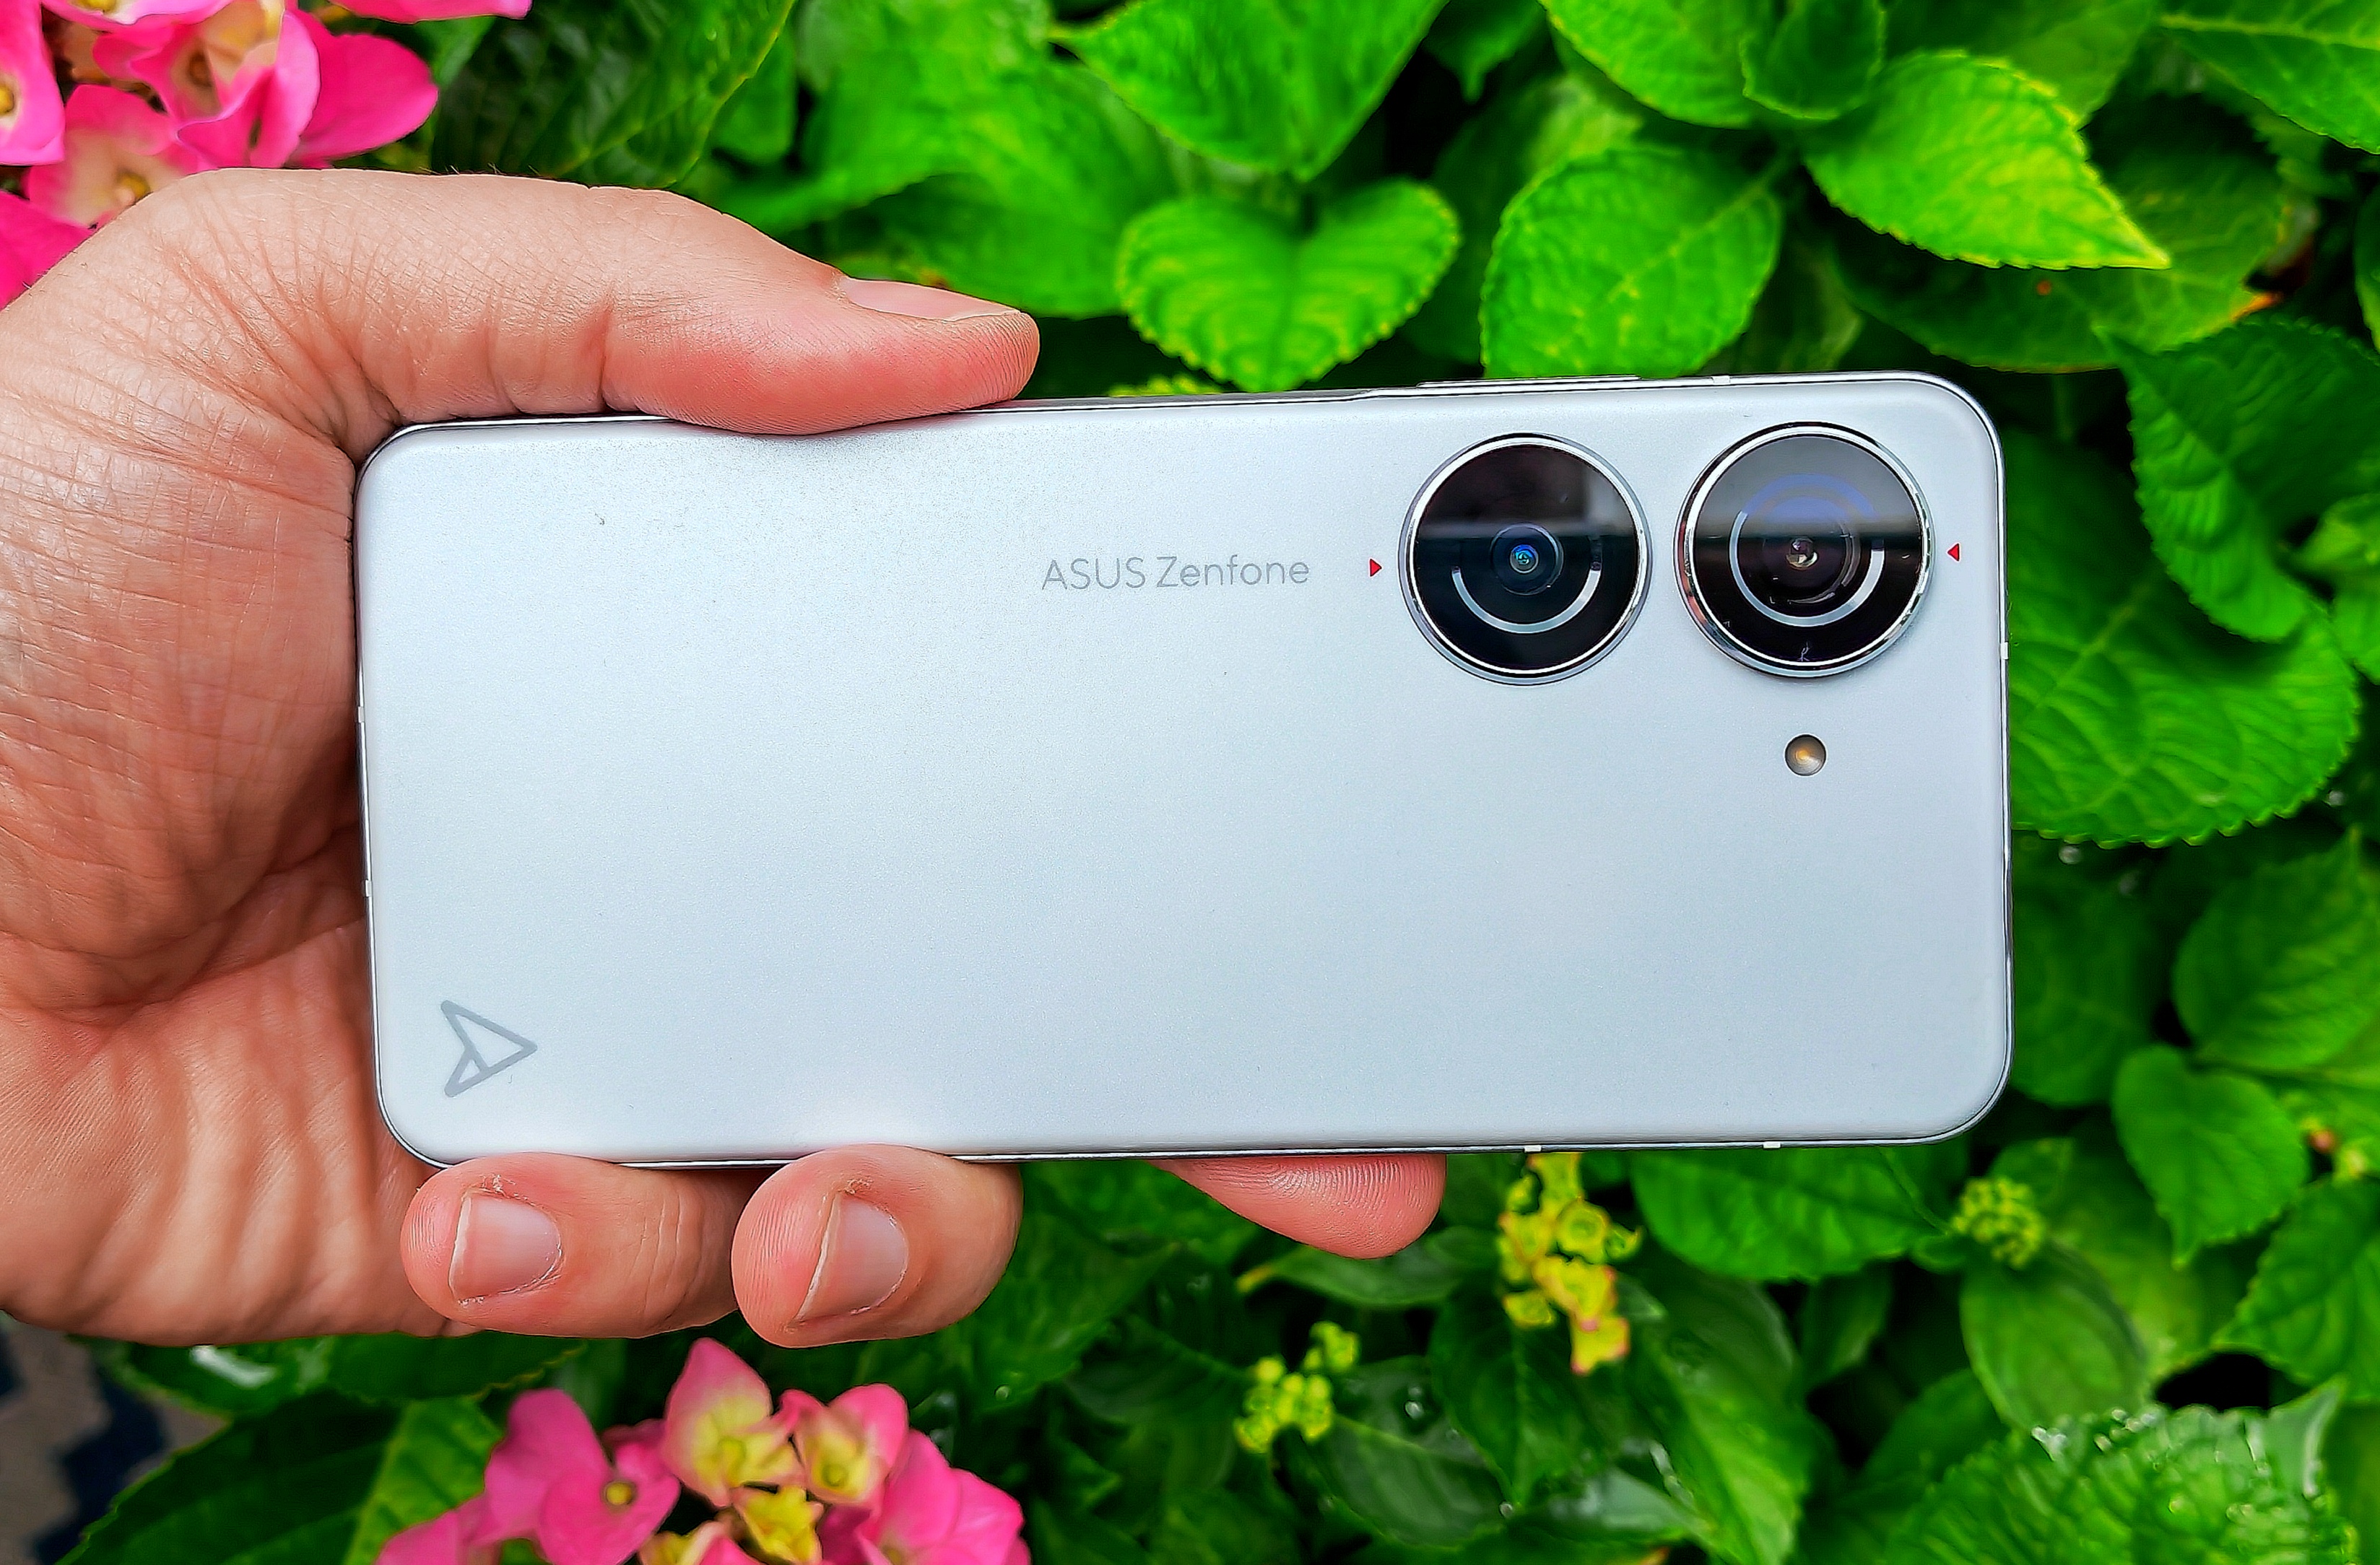 Asus Zenfone 10 review: Compact 5G smartphone with a lot of power